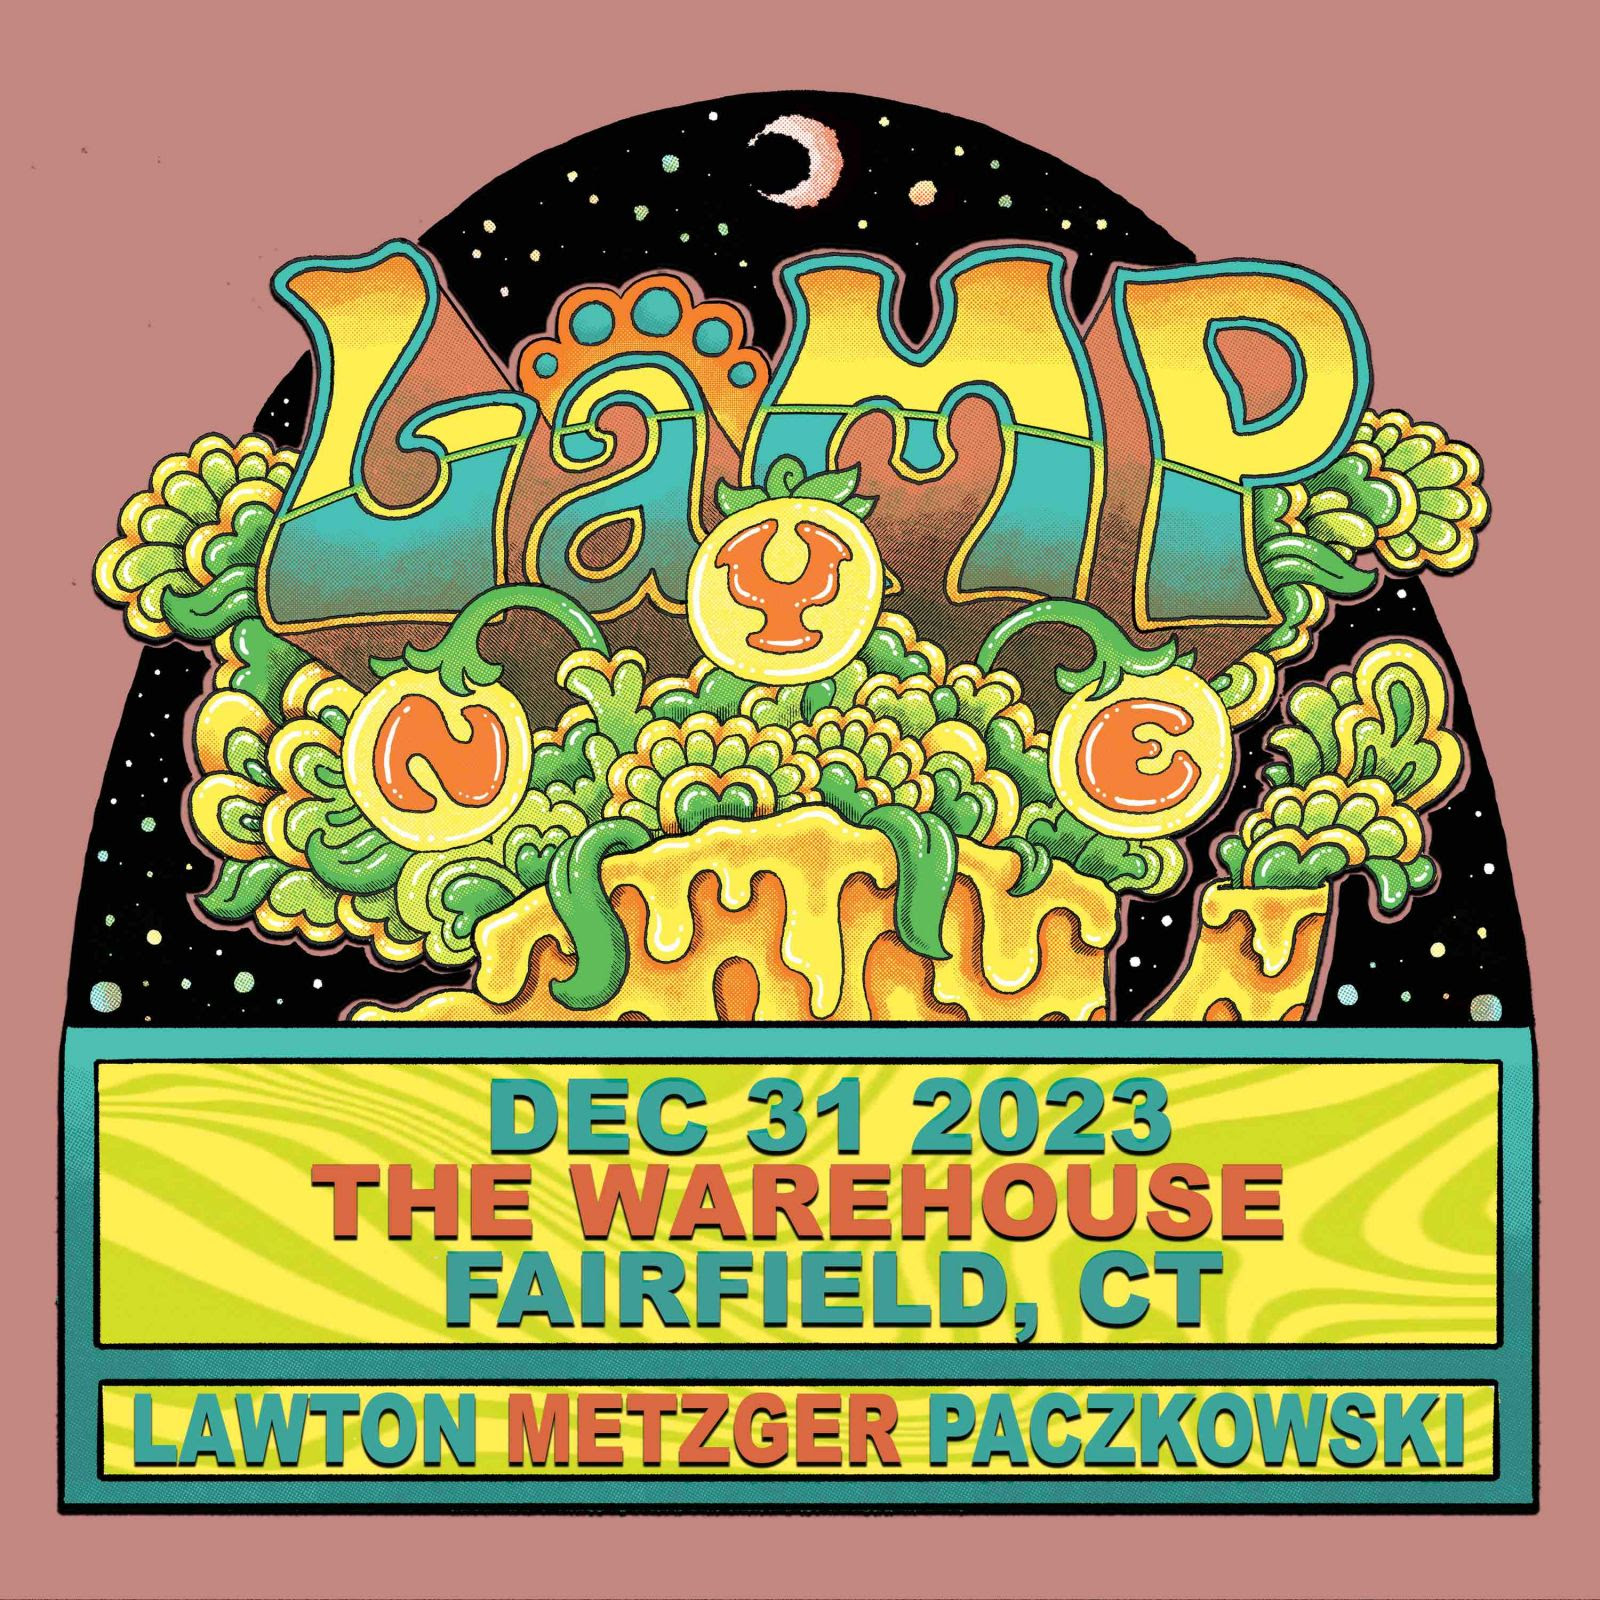 LaMP ft. Russ Lawton, Scott Metzger & Ray Paczkowski Announce NYE Show At The Warehouse In Fairfield, CT